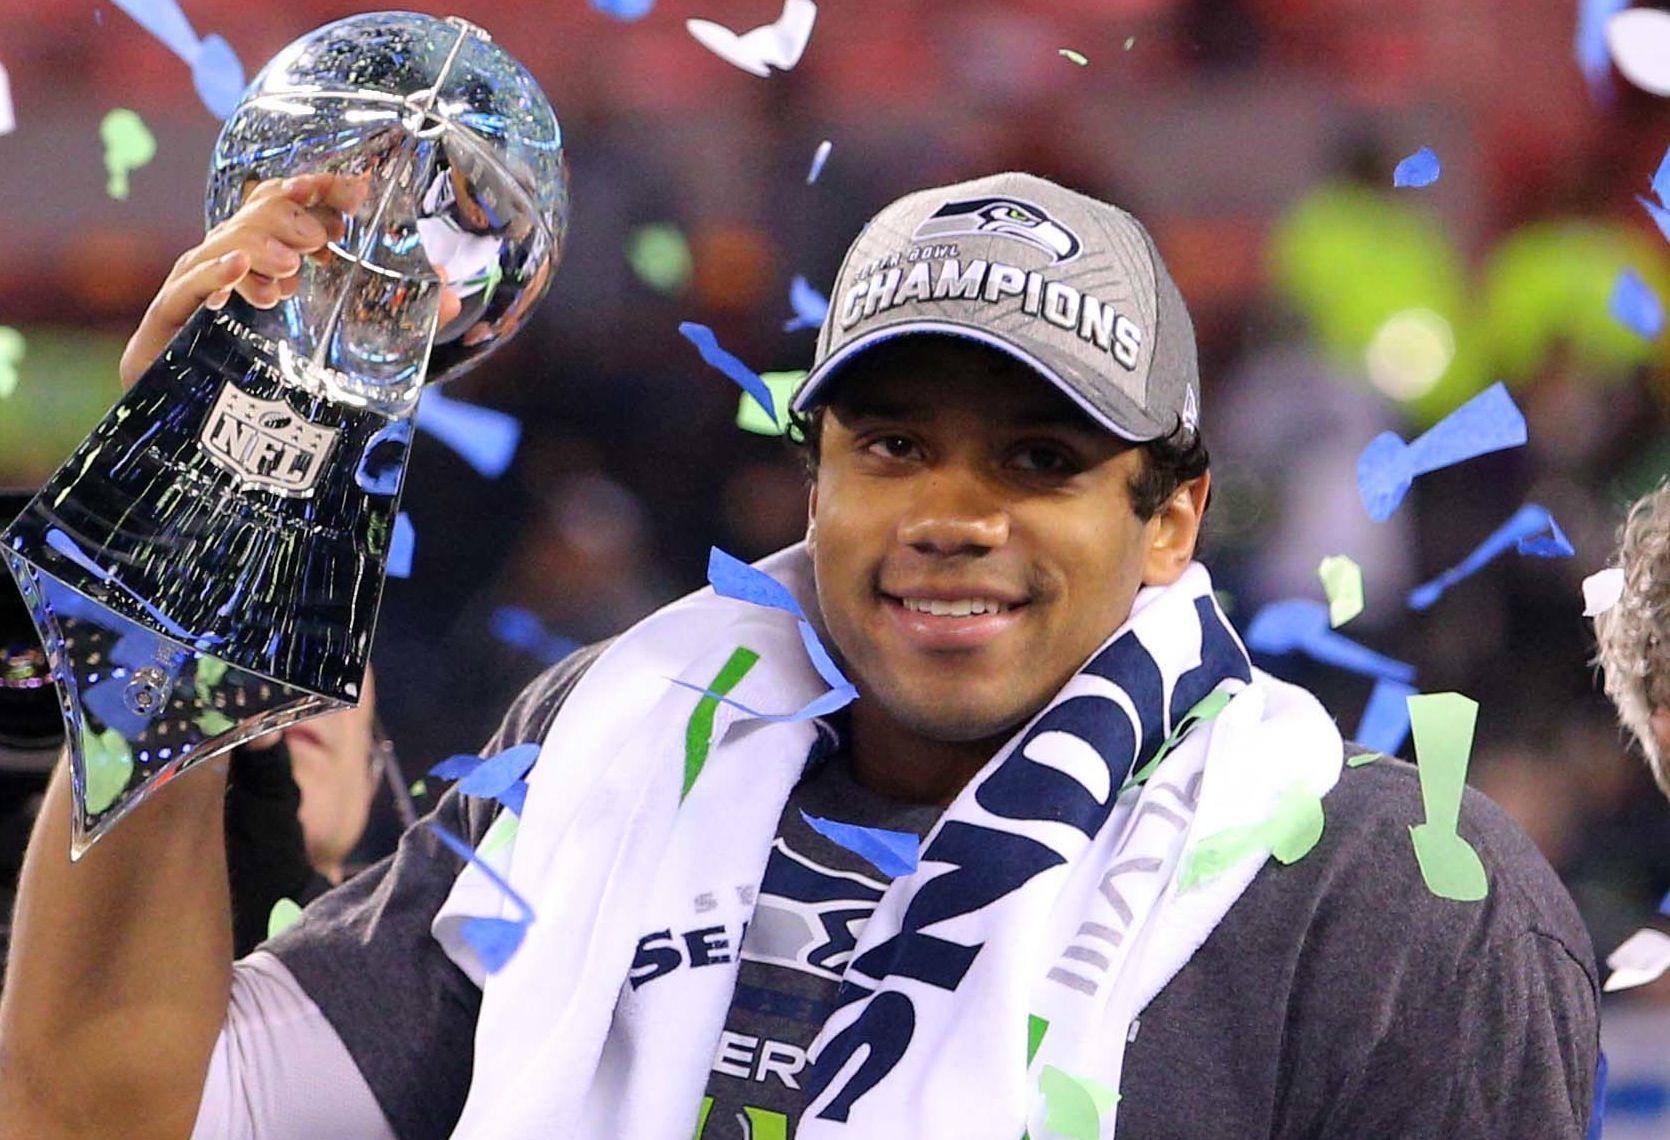 Awesome Russell Wilson HD Wallpaper Free Download